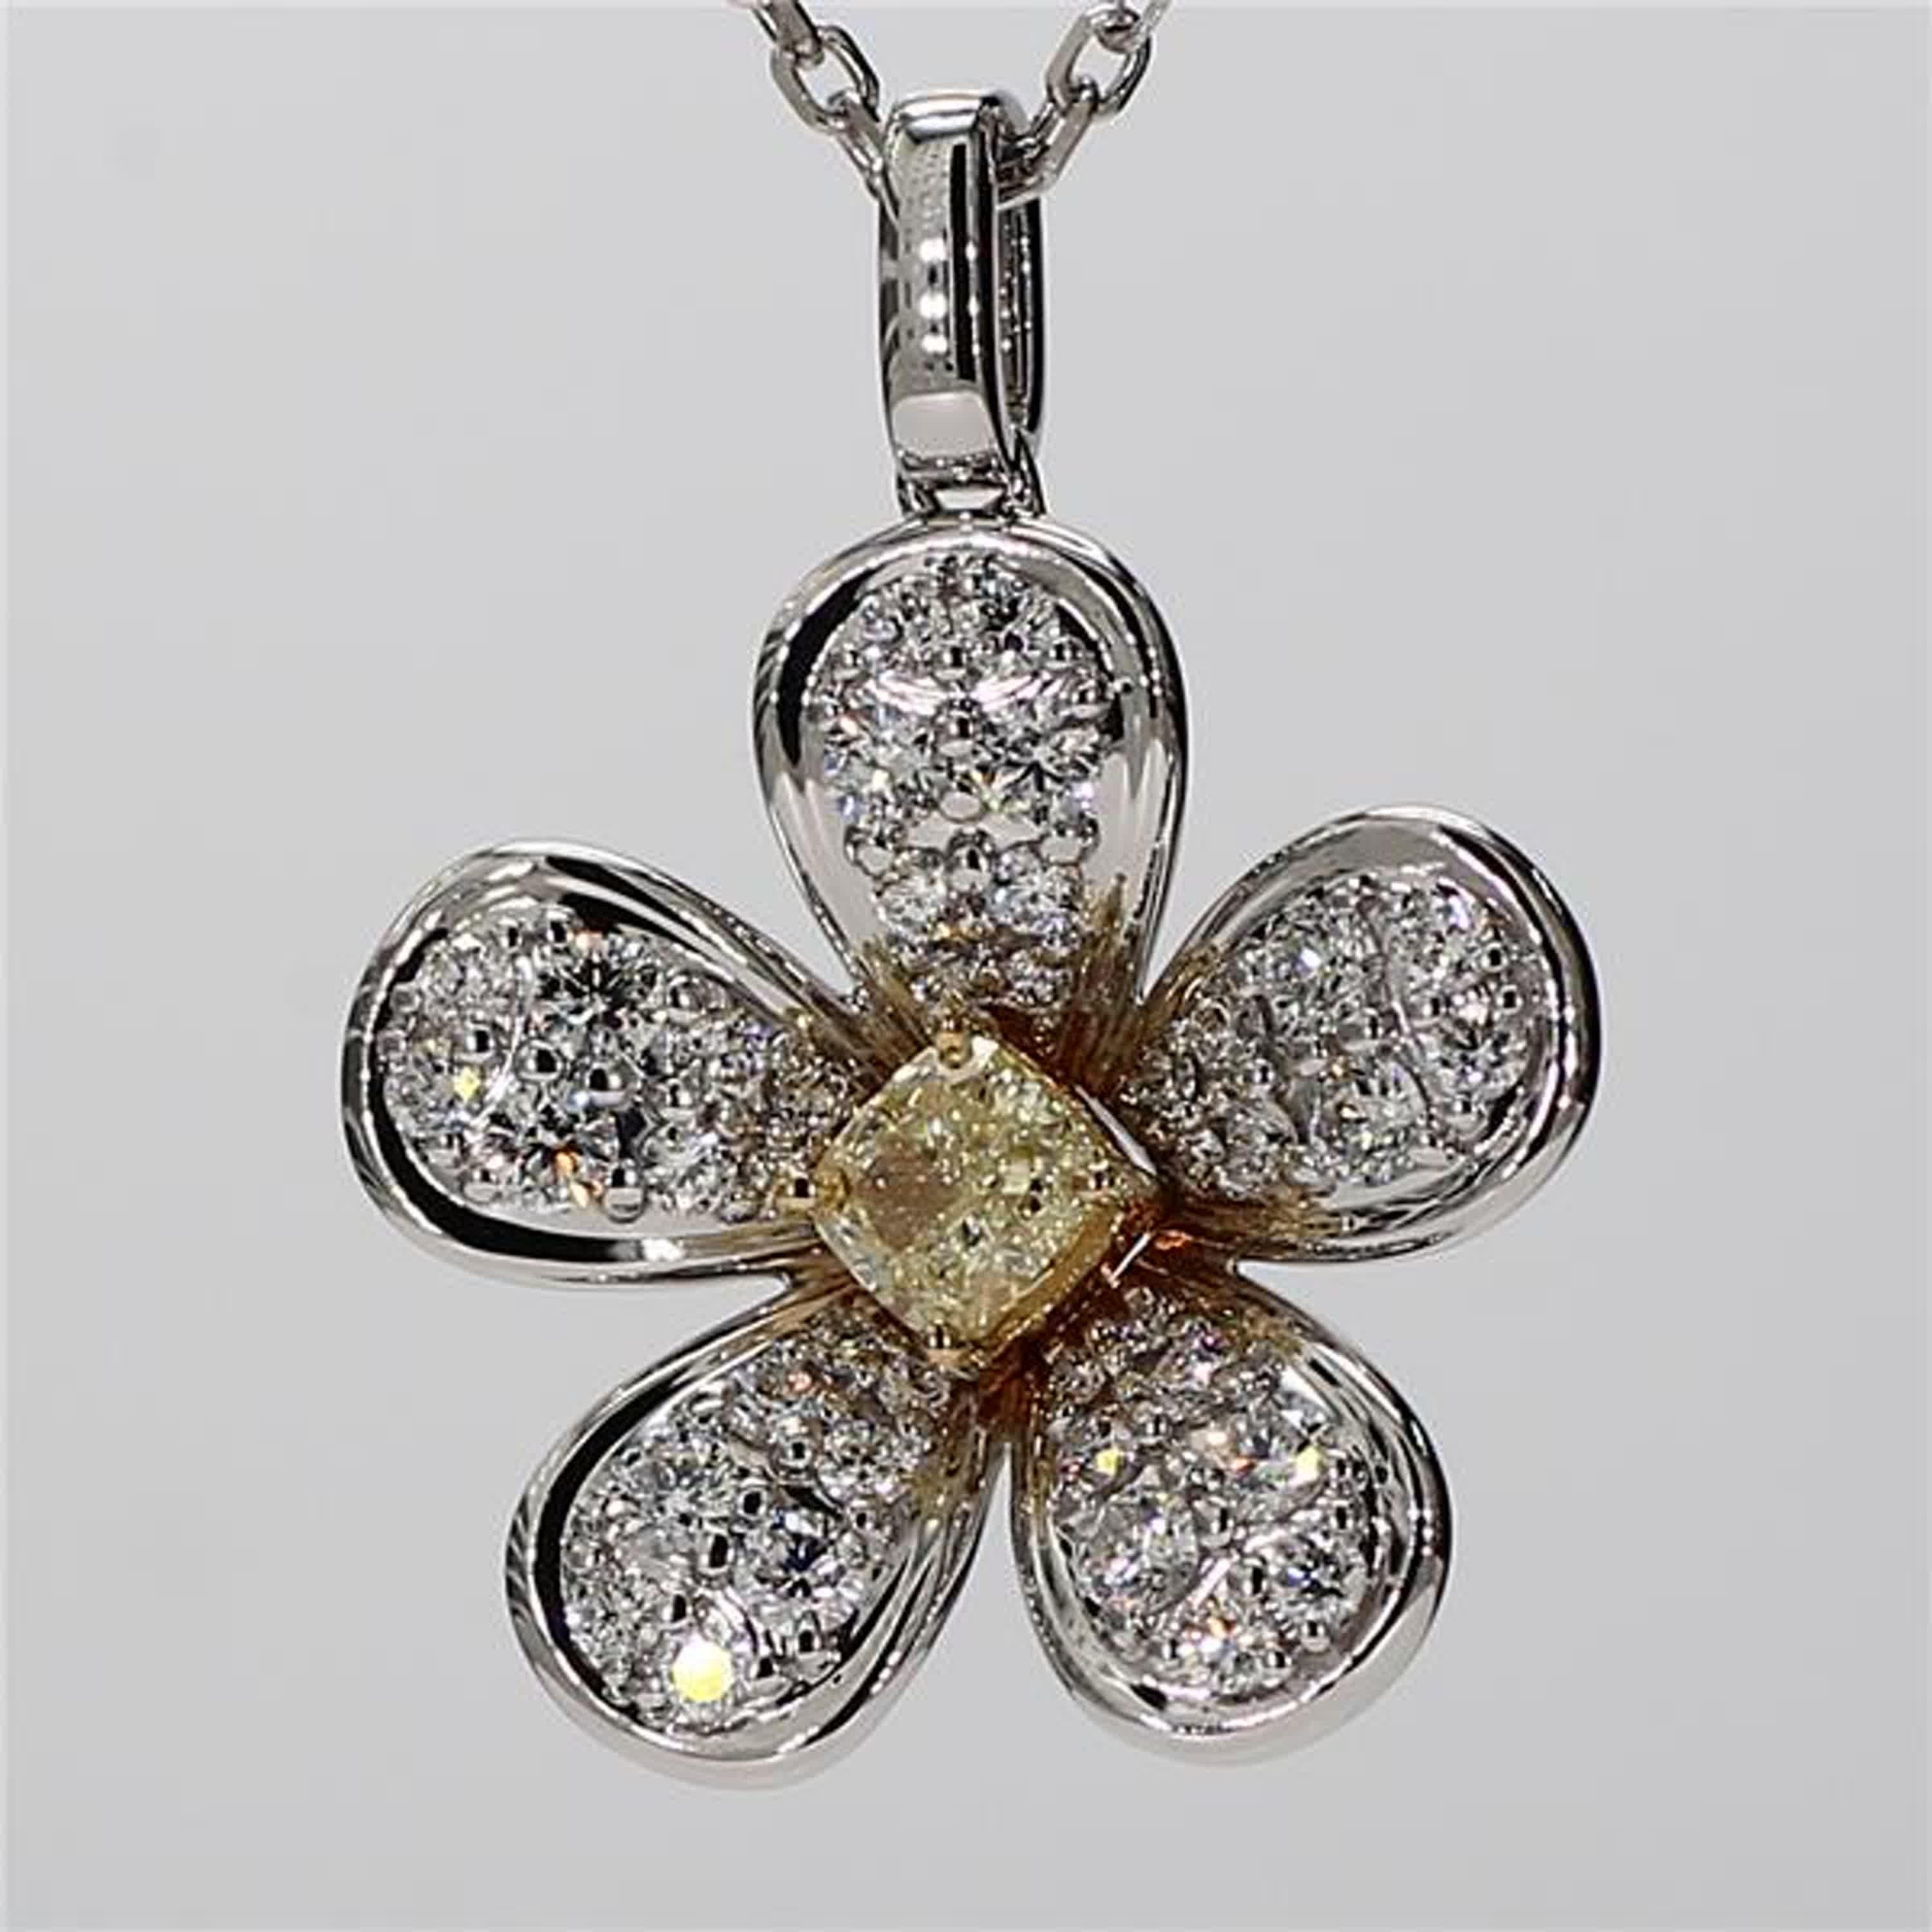 RareGemWorld's intriguing diamond pendant. Mounted in a beautiful 18K Yellow and White Gold setting with a natural cushion cut yellow diamond. The yellow diamond is surrounded by small round natural white diamond melee in a beautiful flower shape.